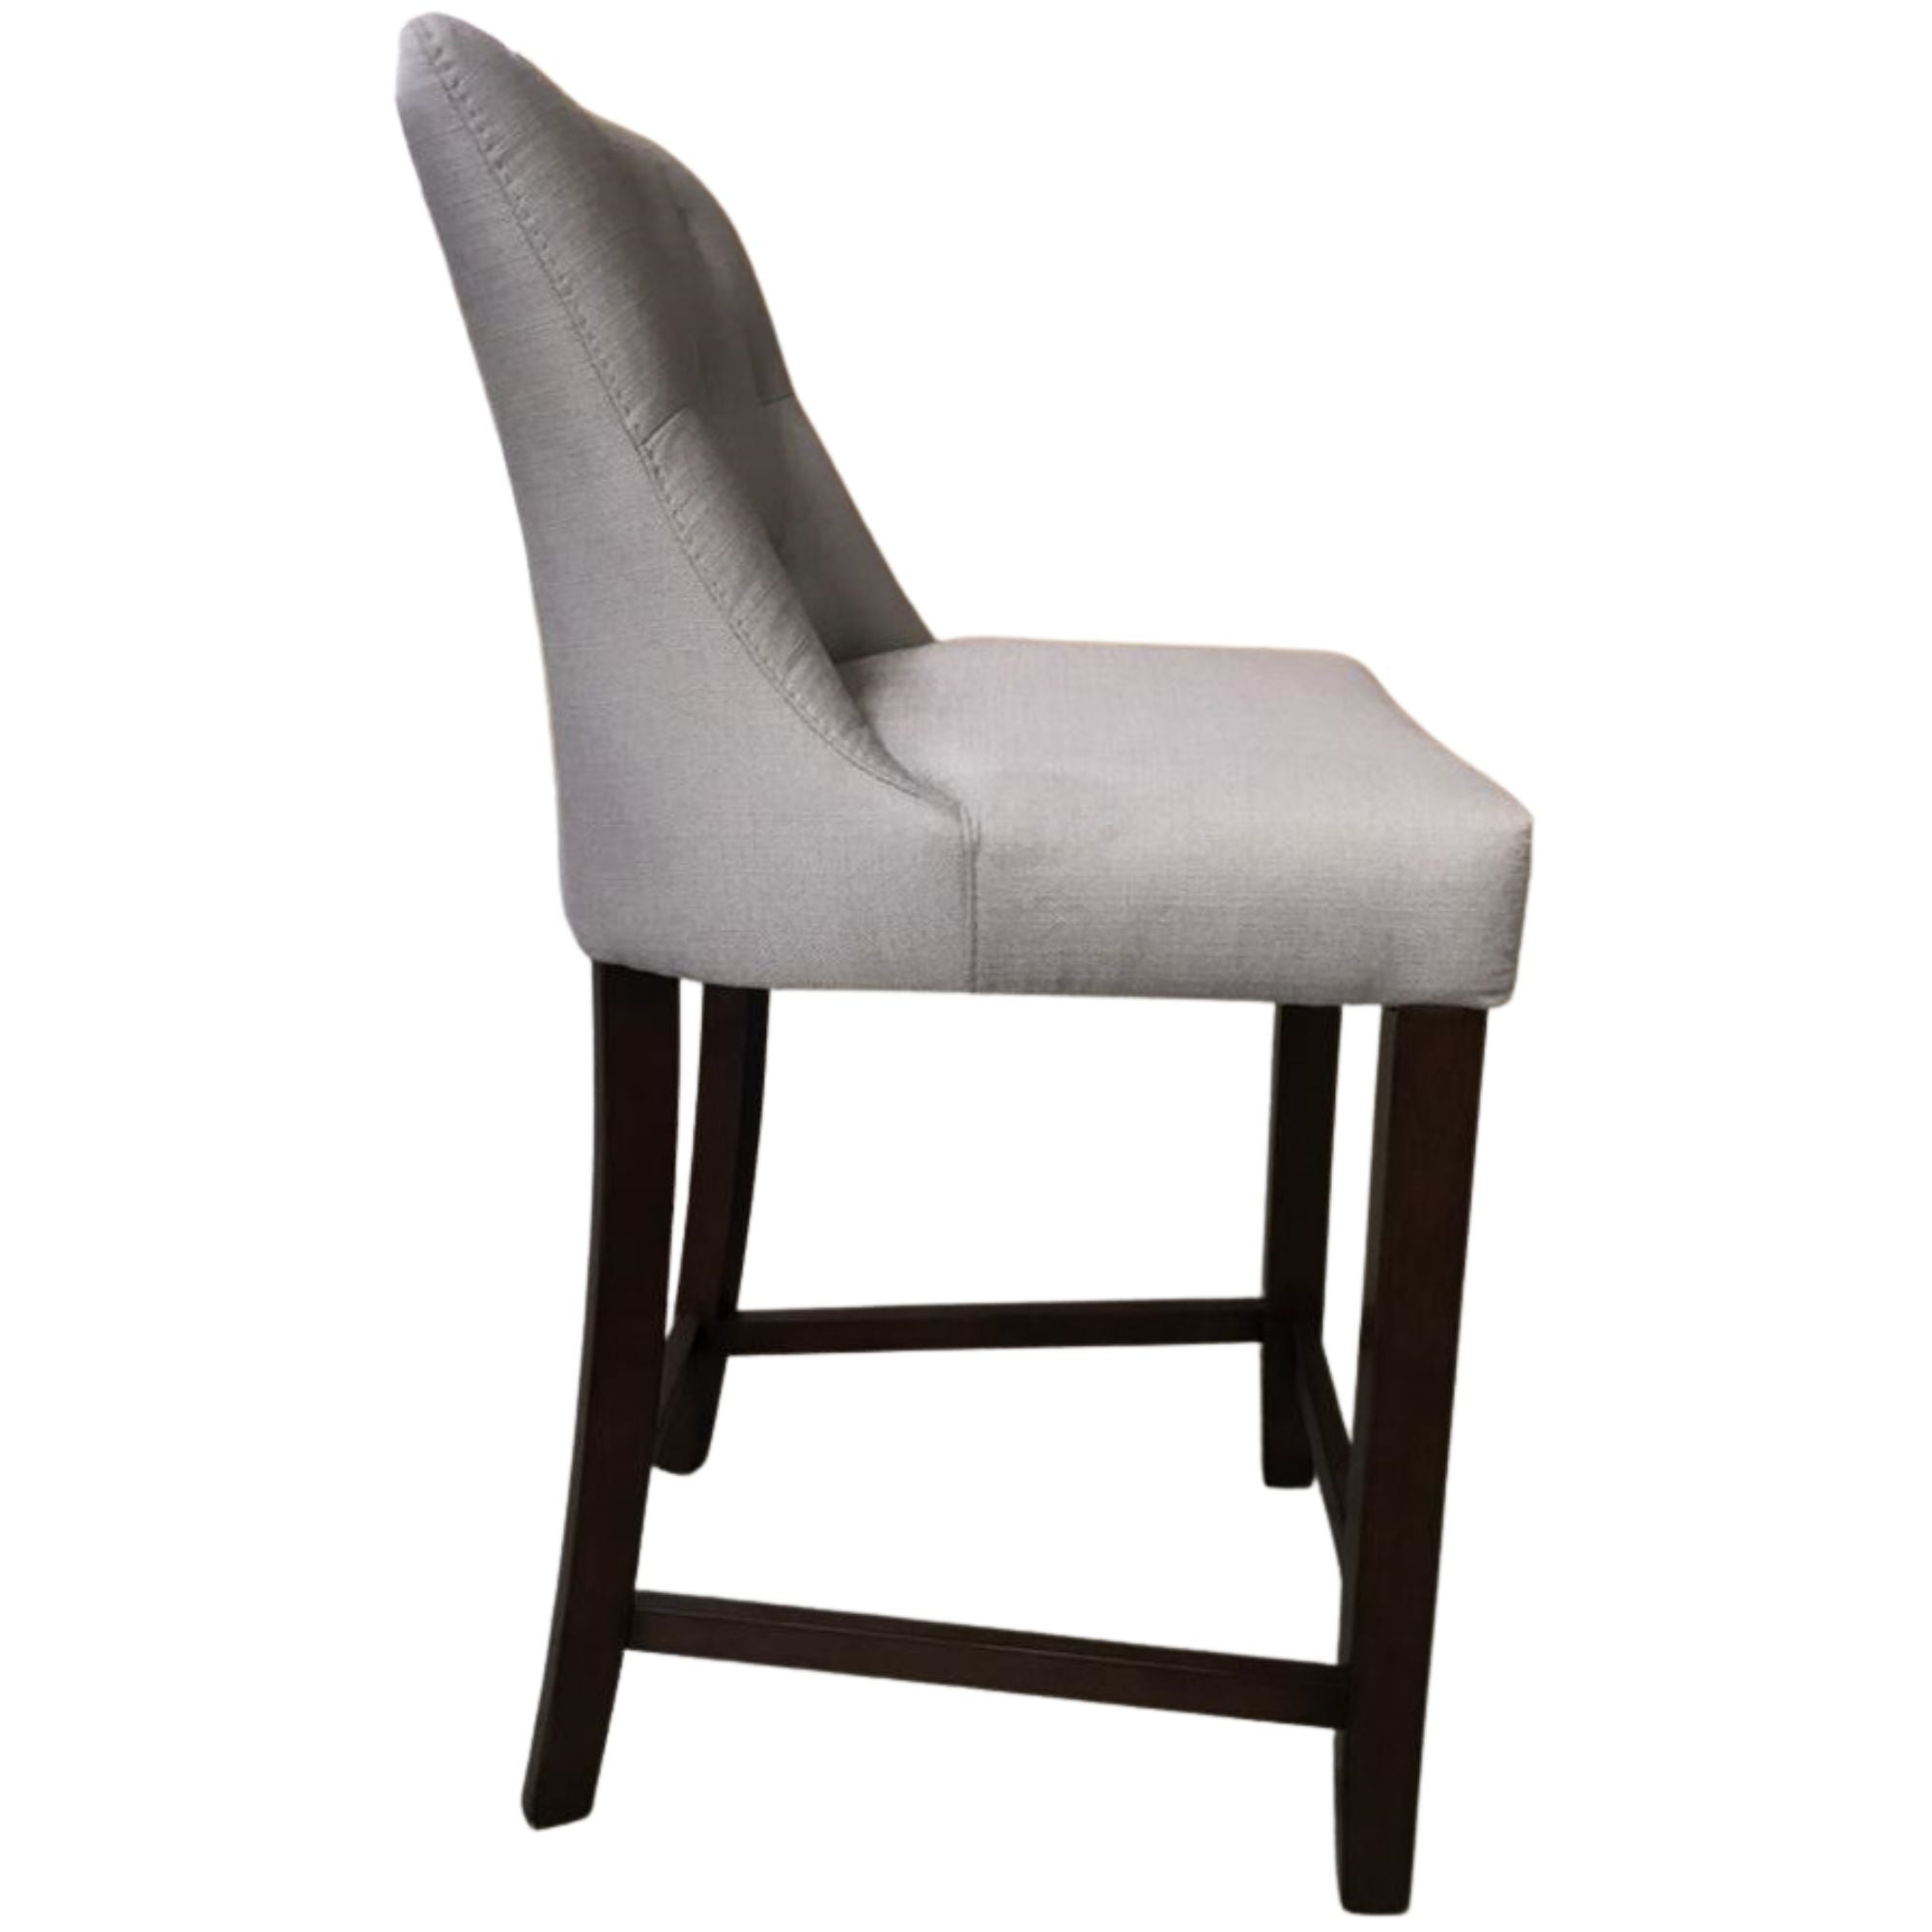 Florence  4pc High Fabric Dining Chair Bar Stool French Provincial Solid Timber Deals499